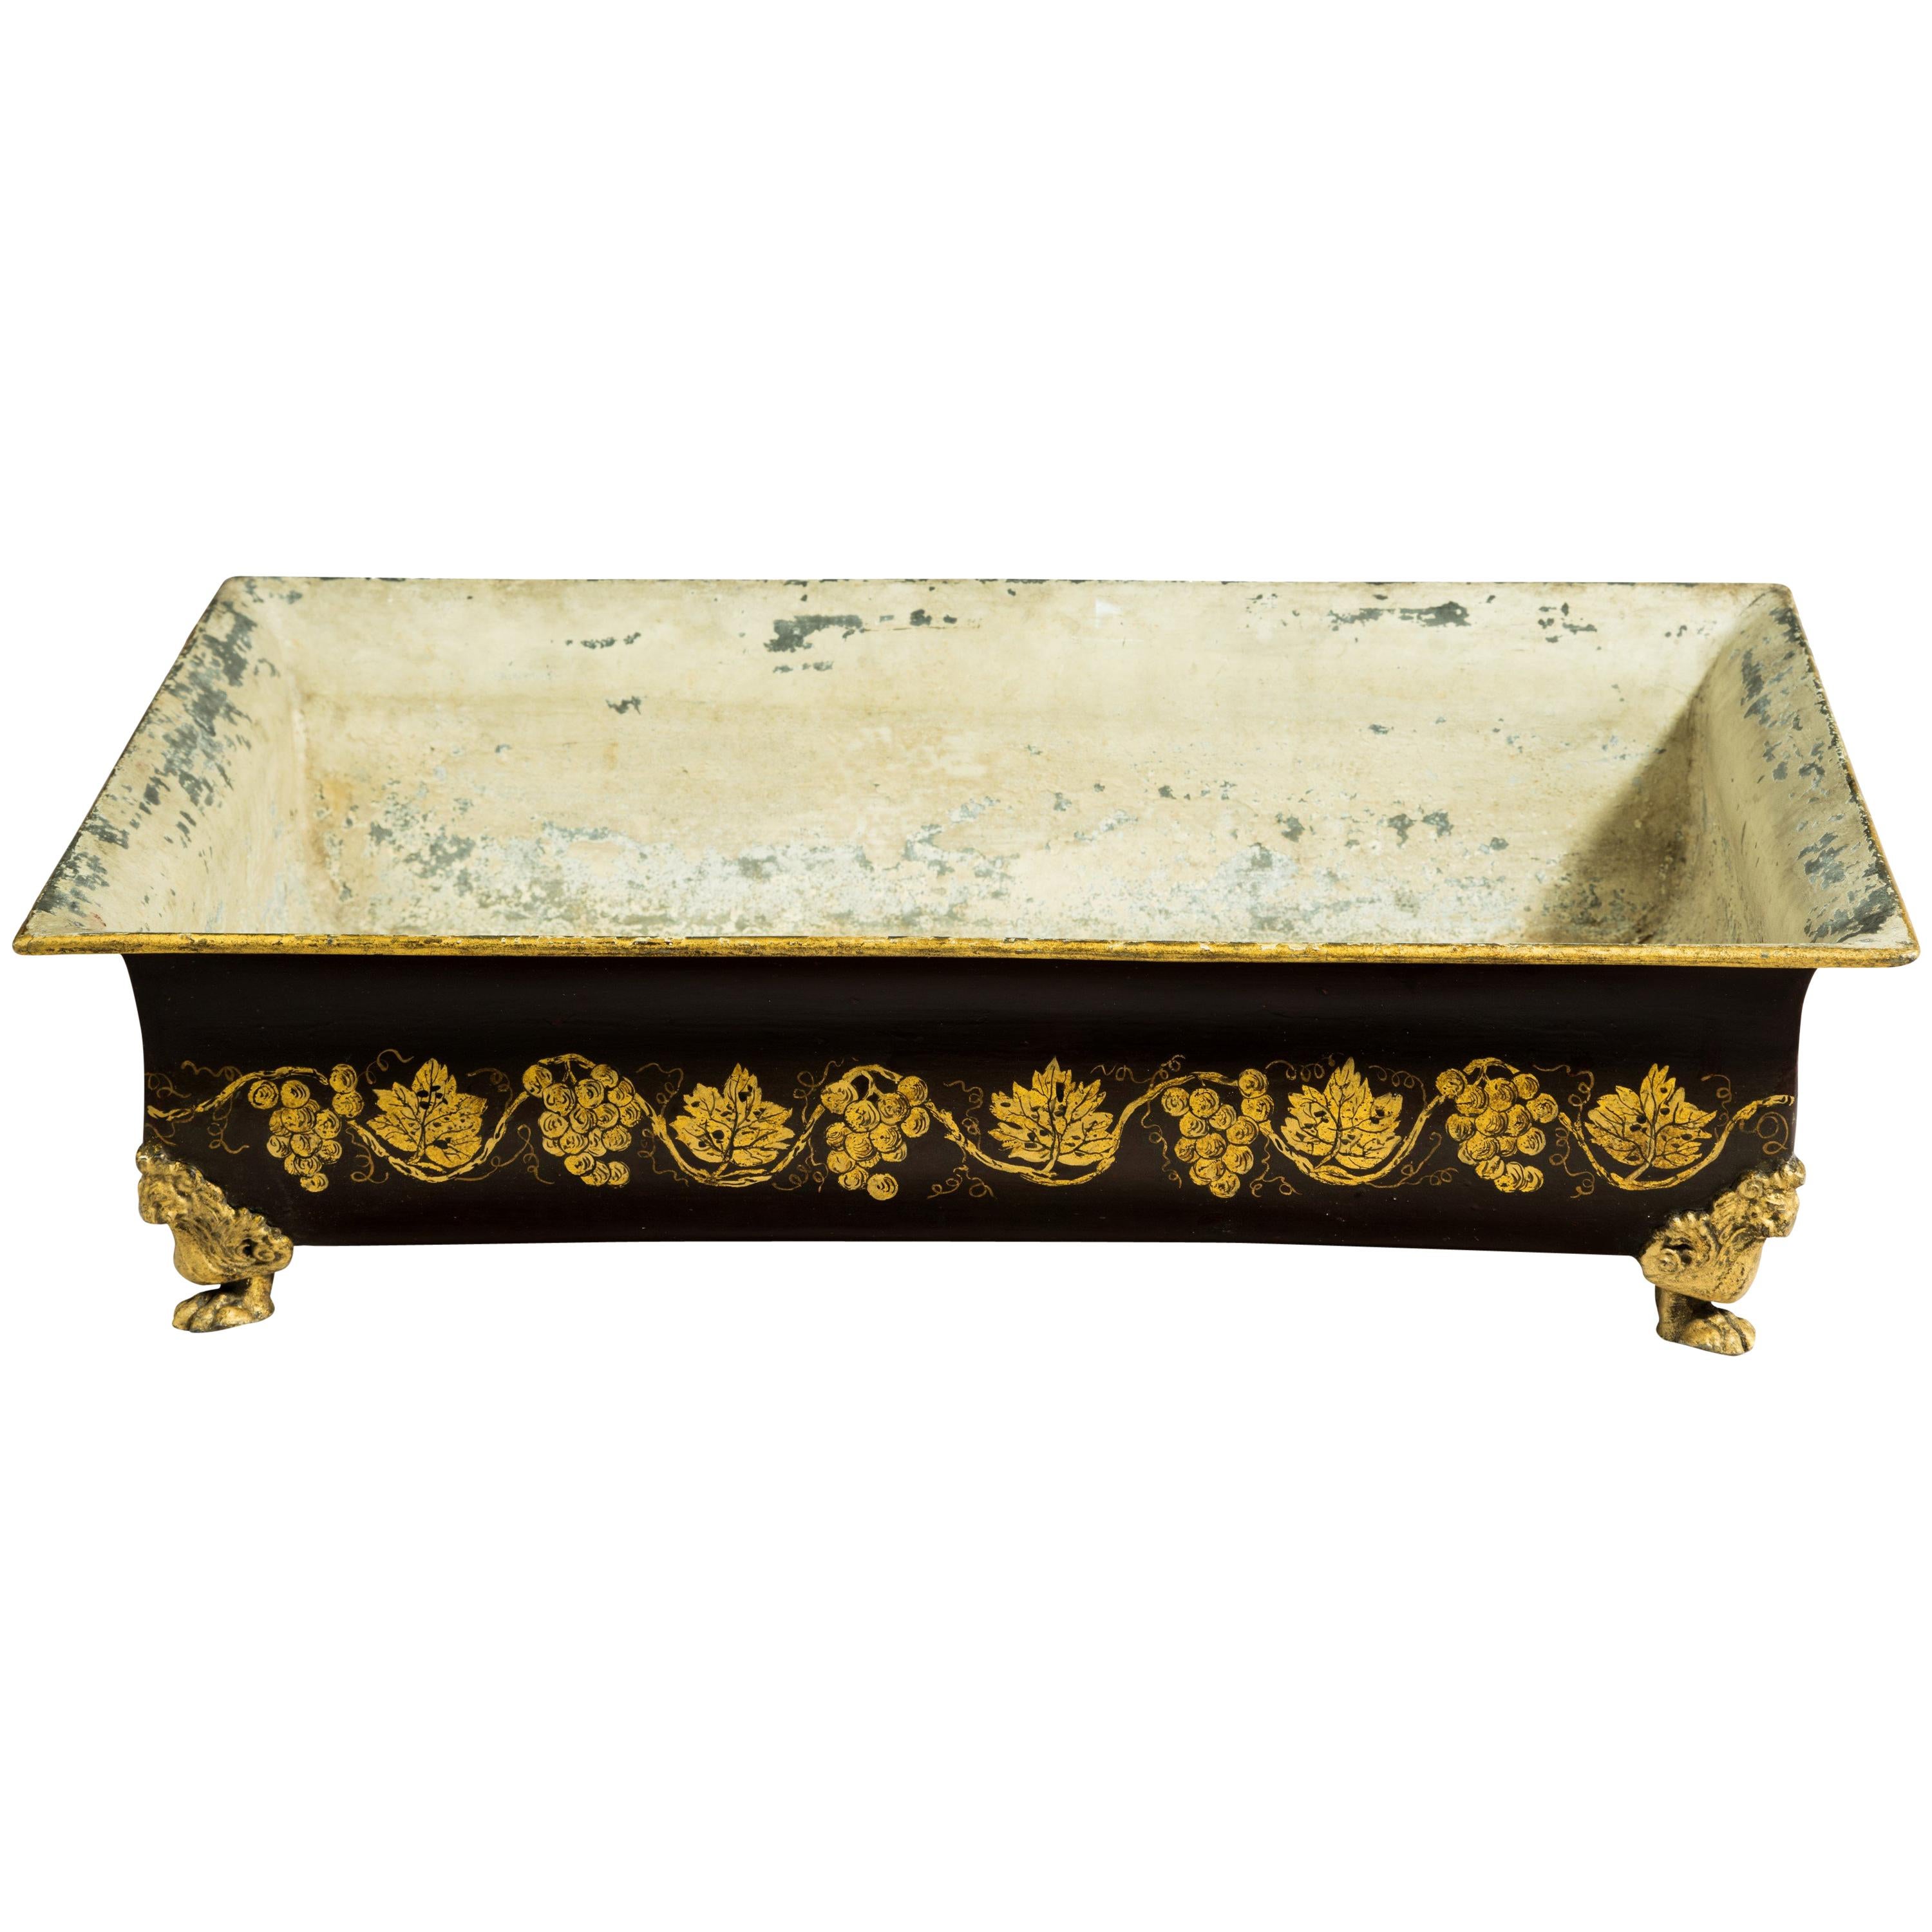 19th Century rectangular Tole Planter with decorated sides